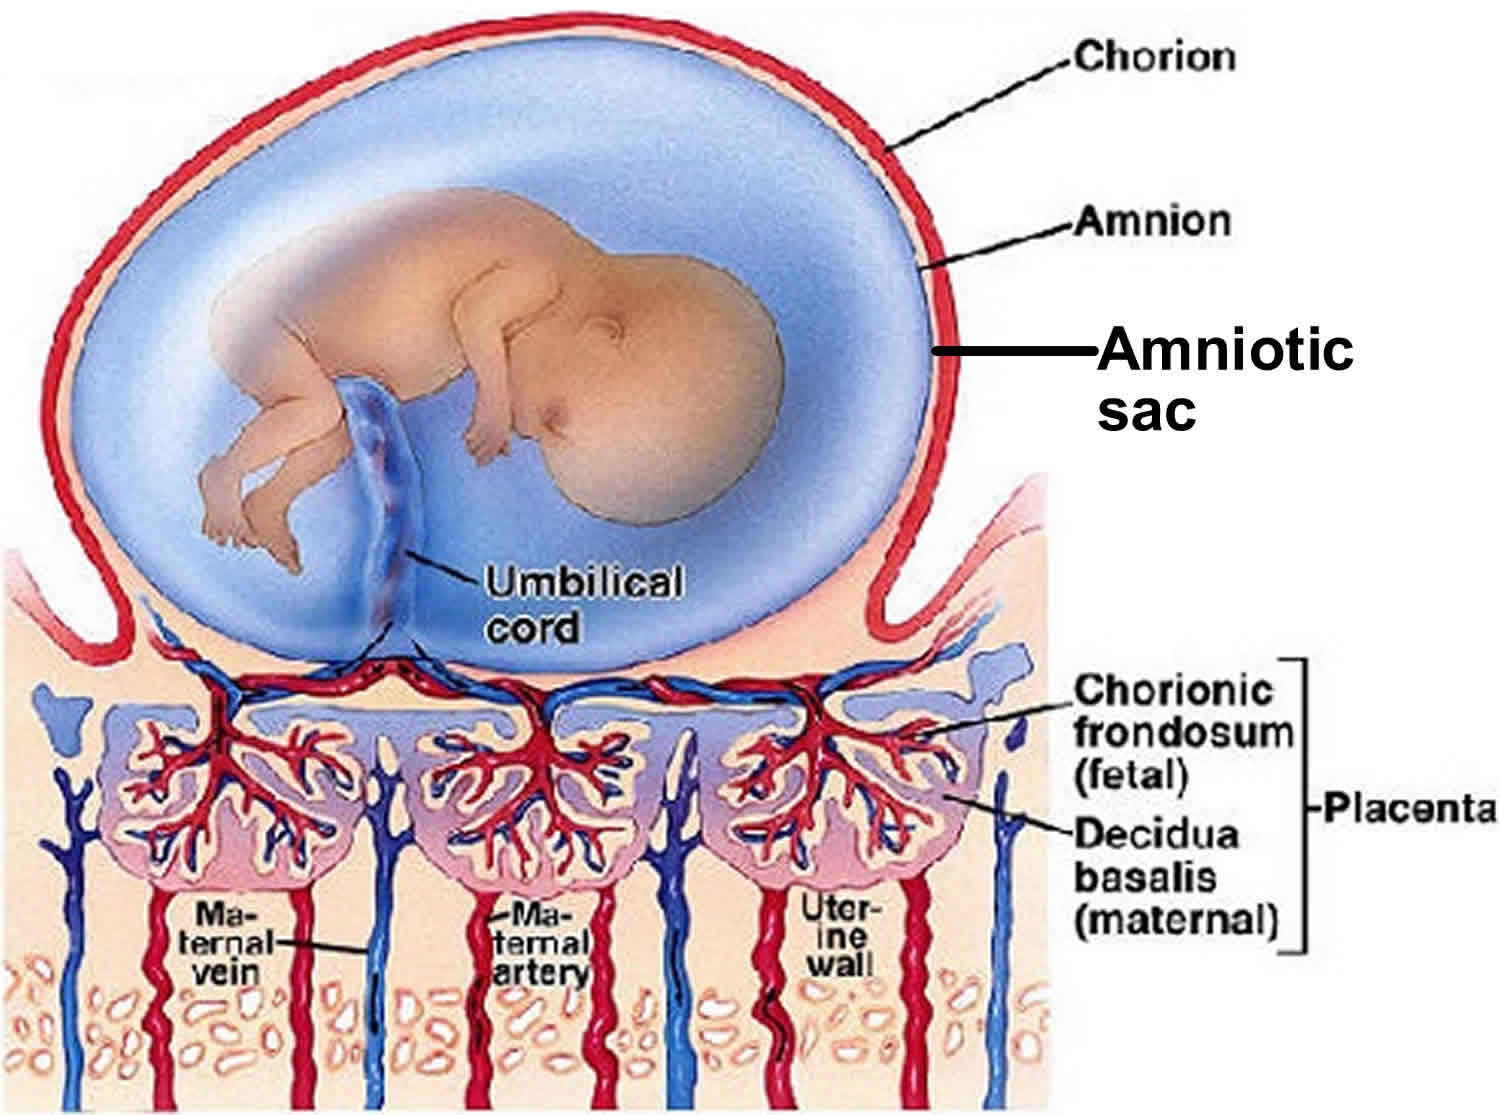 Rooster Frightening Snack Amniotic sac definition, amniotic sac function & amniotic sac rupture